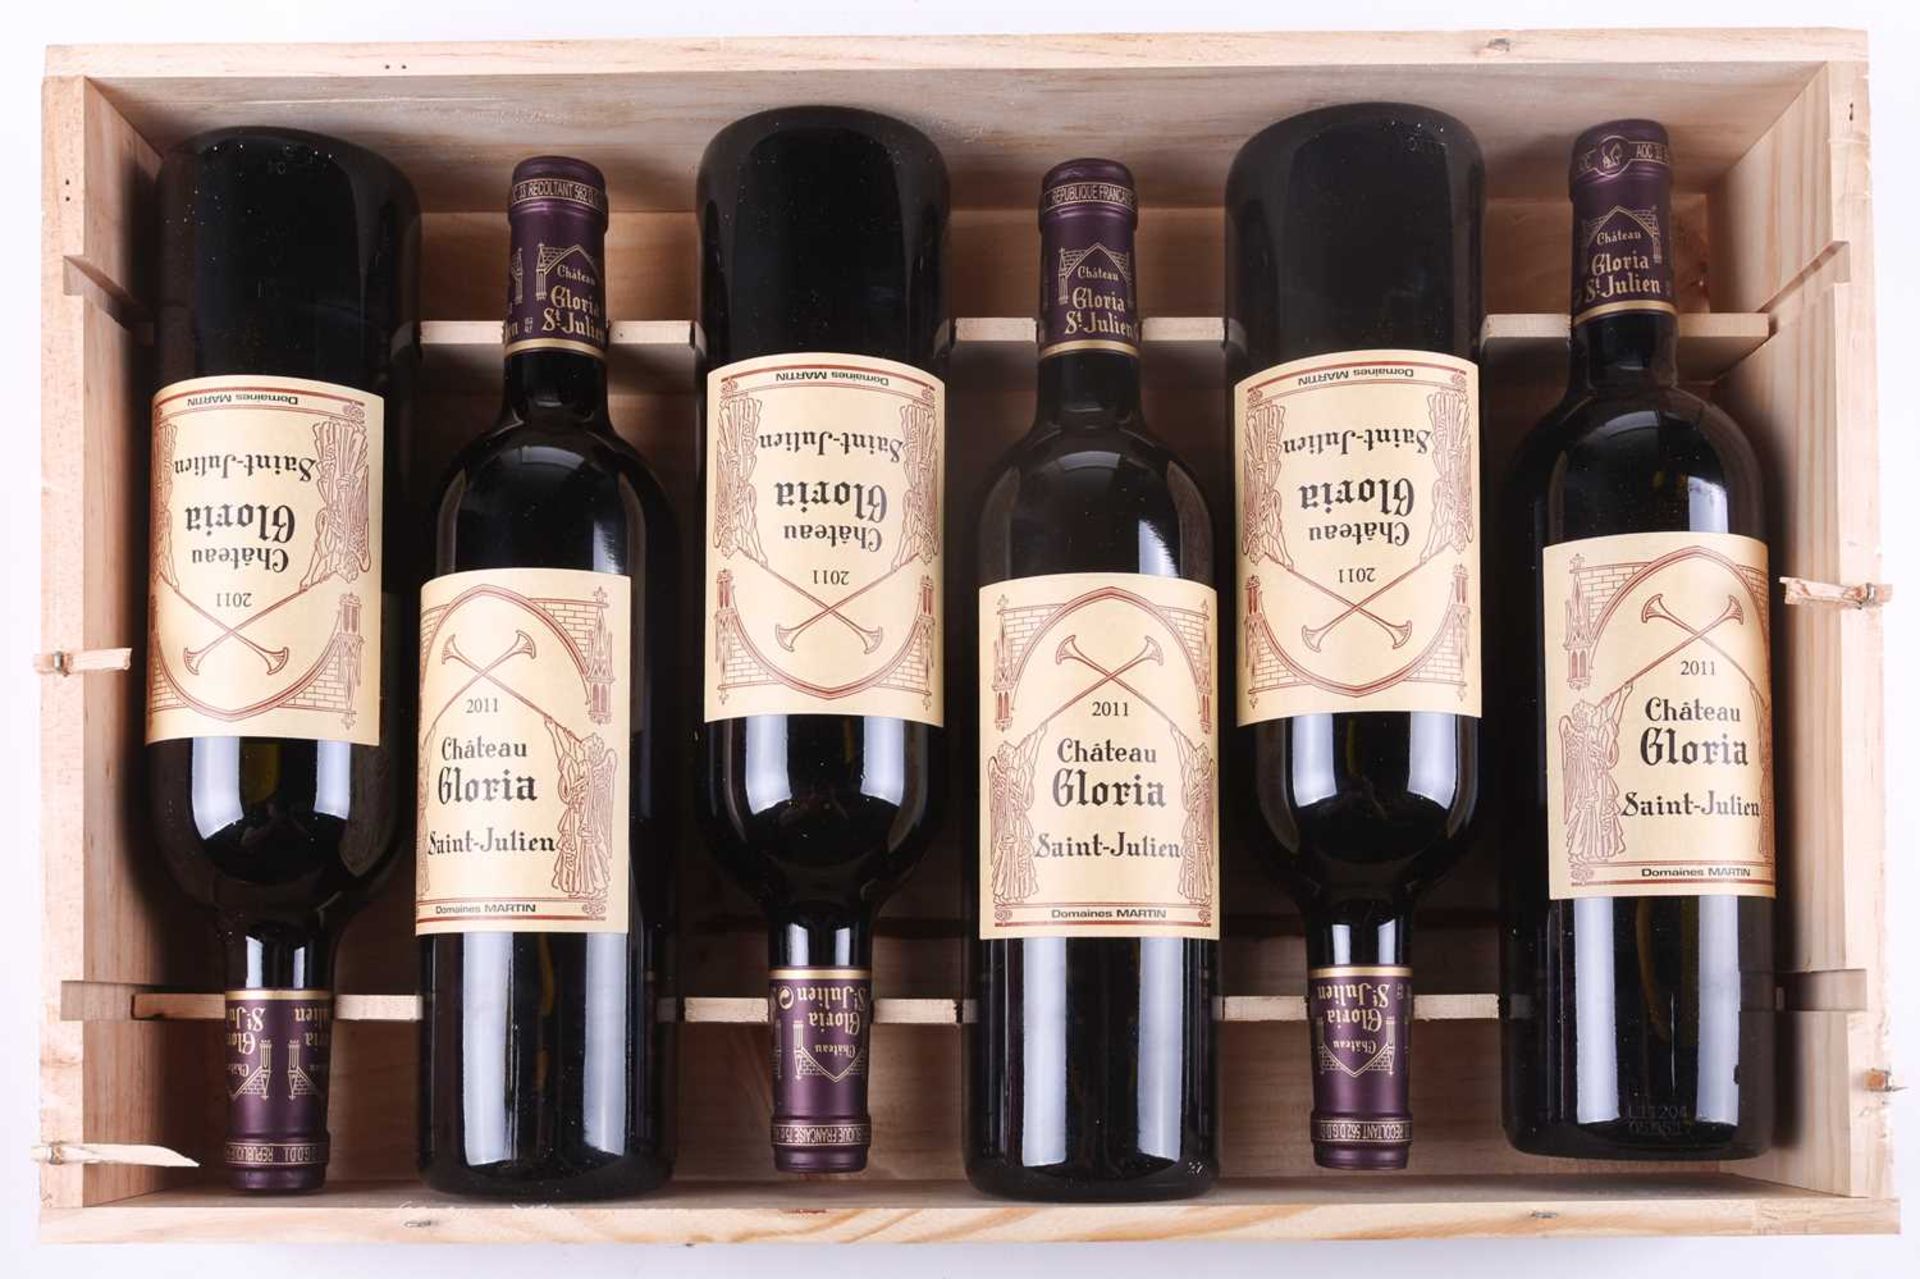 Six bottles of Chateau Gloria St Julien Bordeaux, 2011, OWCPrivate collector in London Unopened - Image 2 of 21